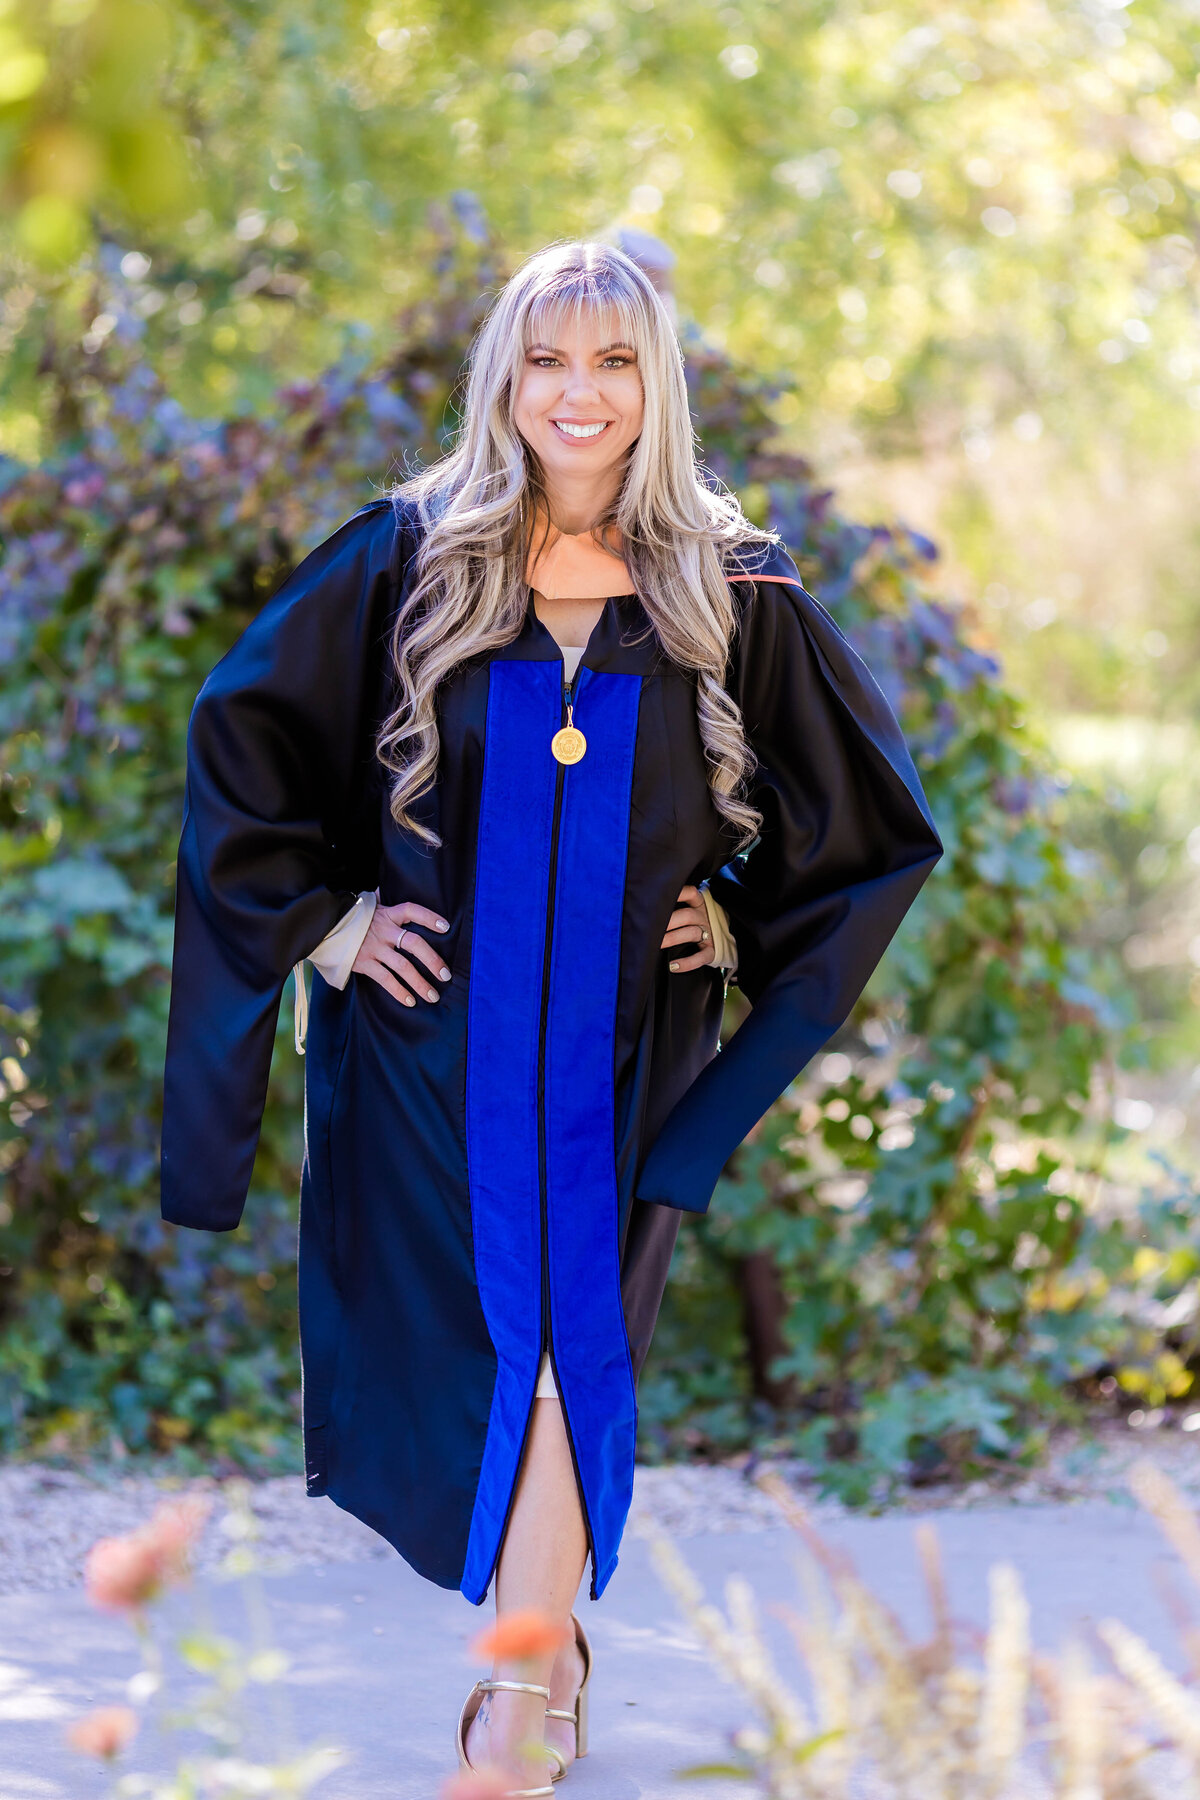 Woman UTA graduate  standing with hands on hips  and smiling at the camera